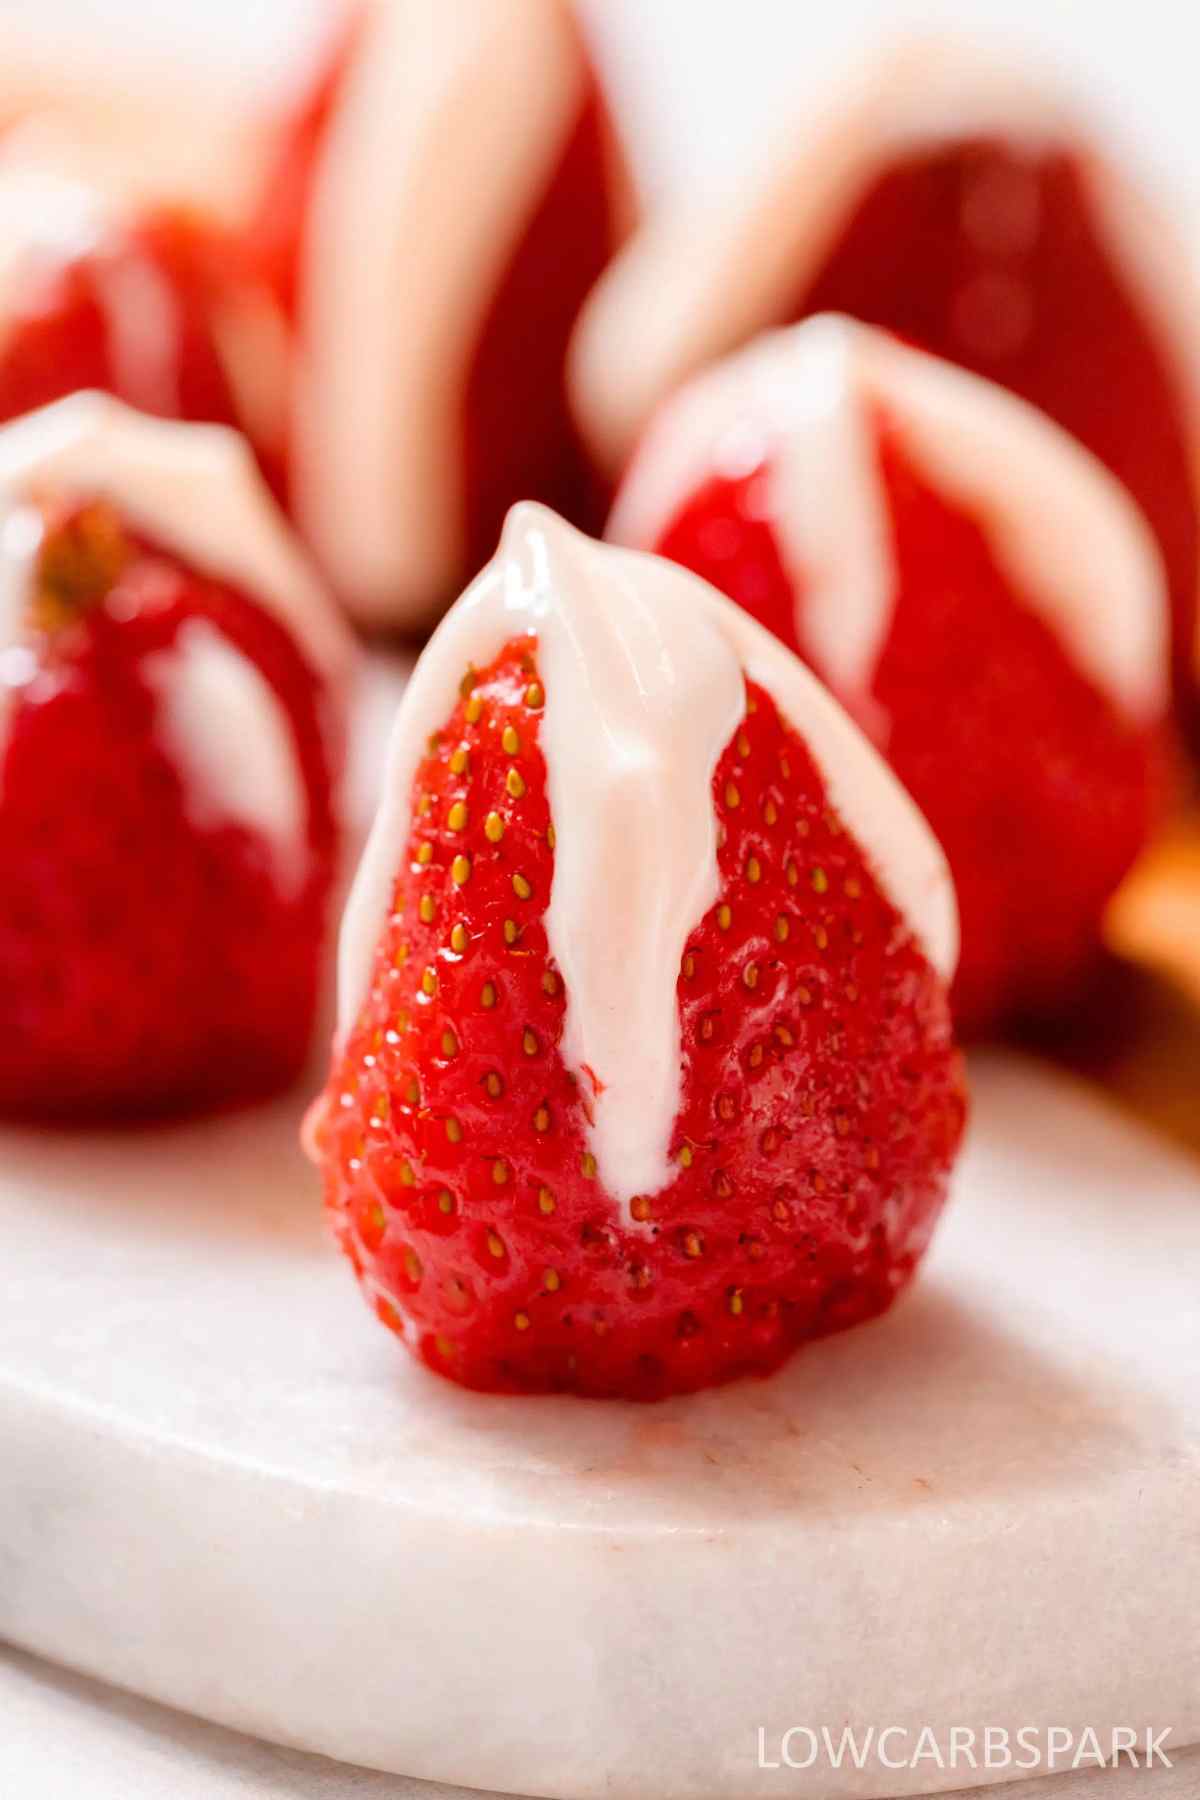 Strawberries stuffed with cheesecake on a white surface.